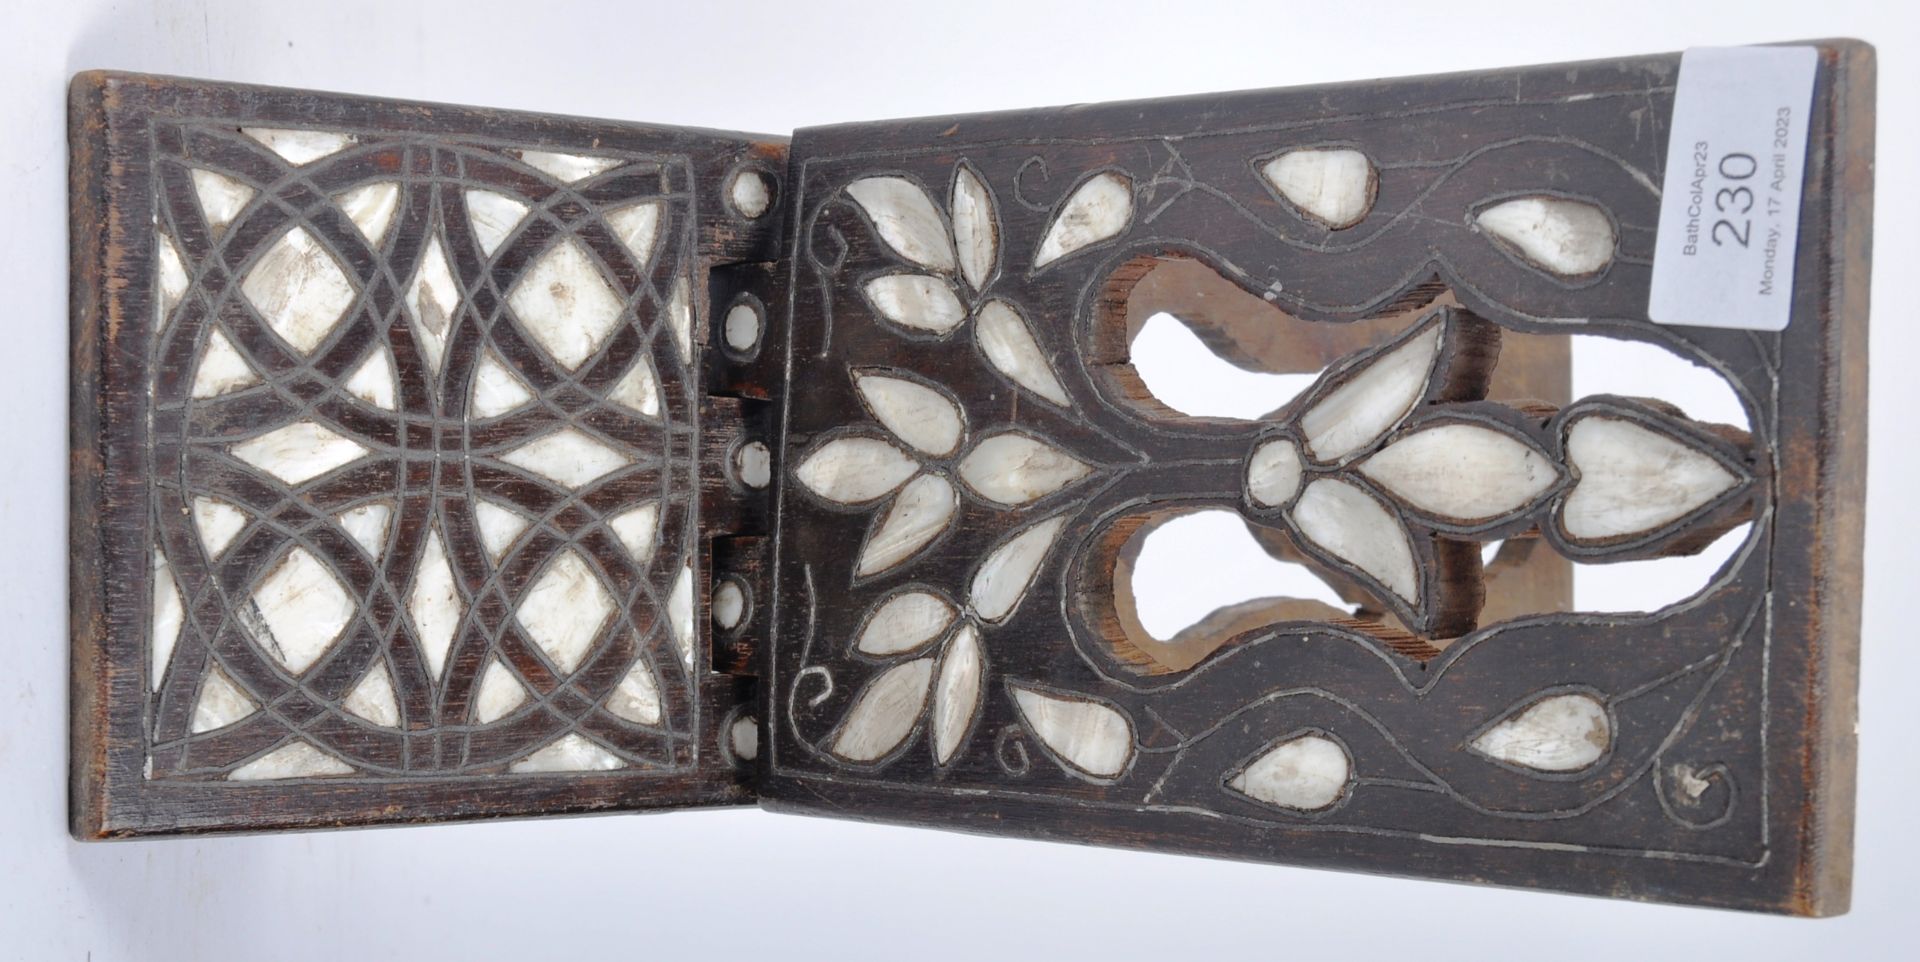 19TH CENTURY ISLAMIC MOTHER OF PEARL FOLDING QURAN STAND - Image 3 of 7